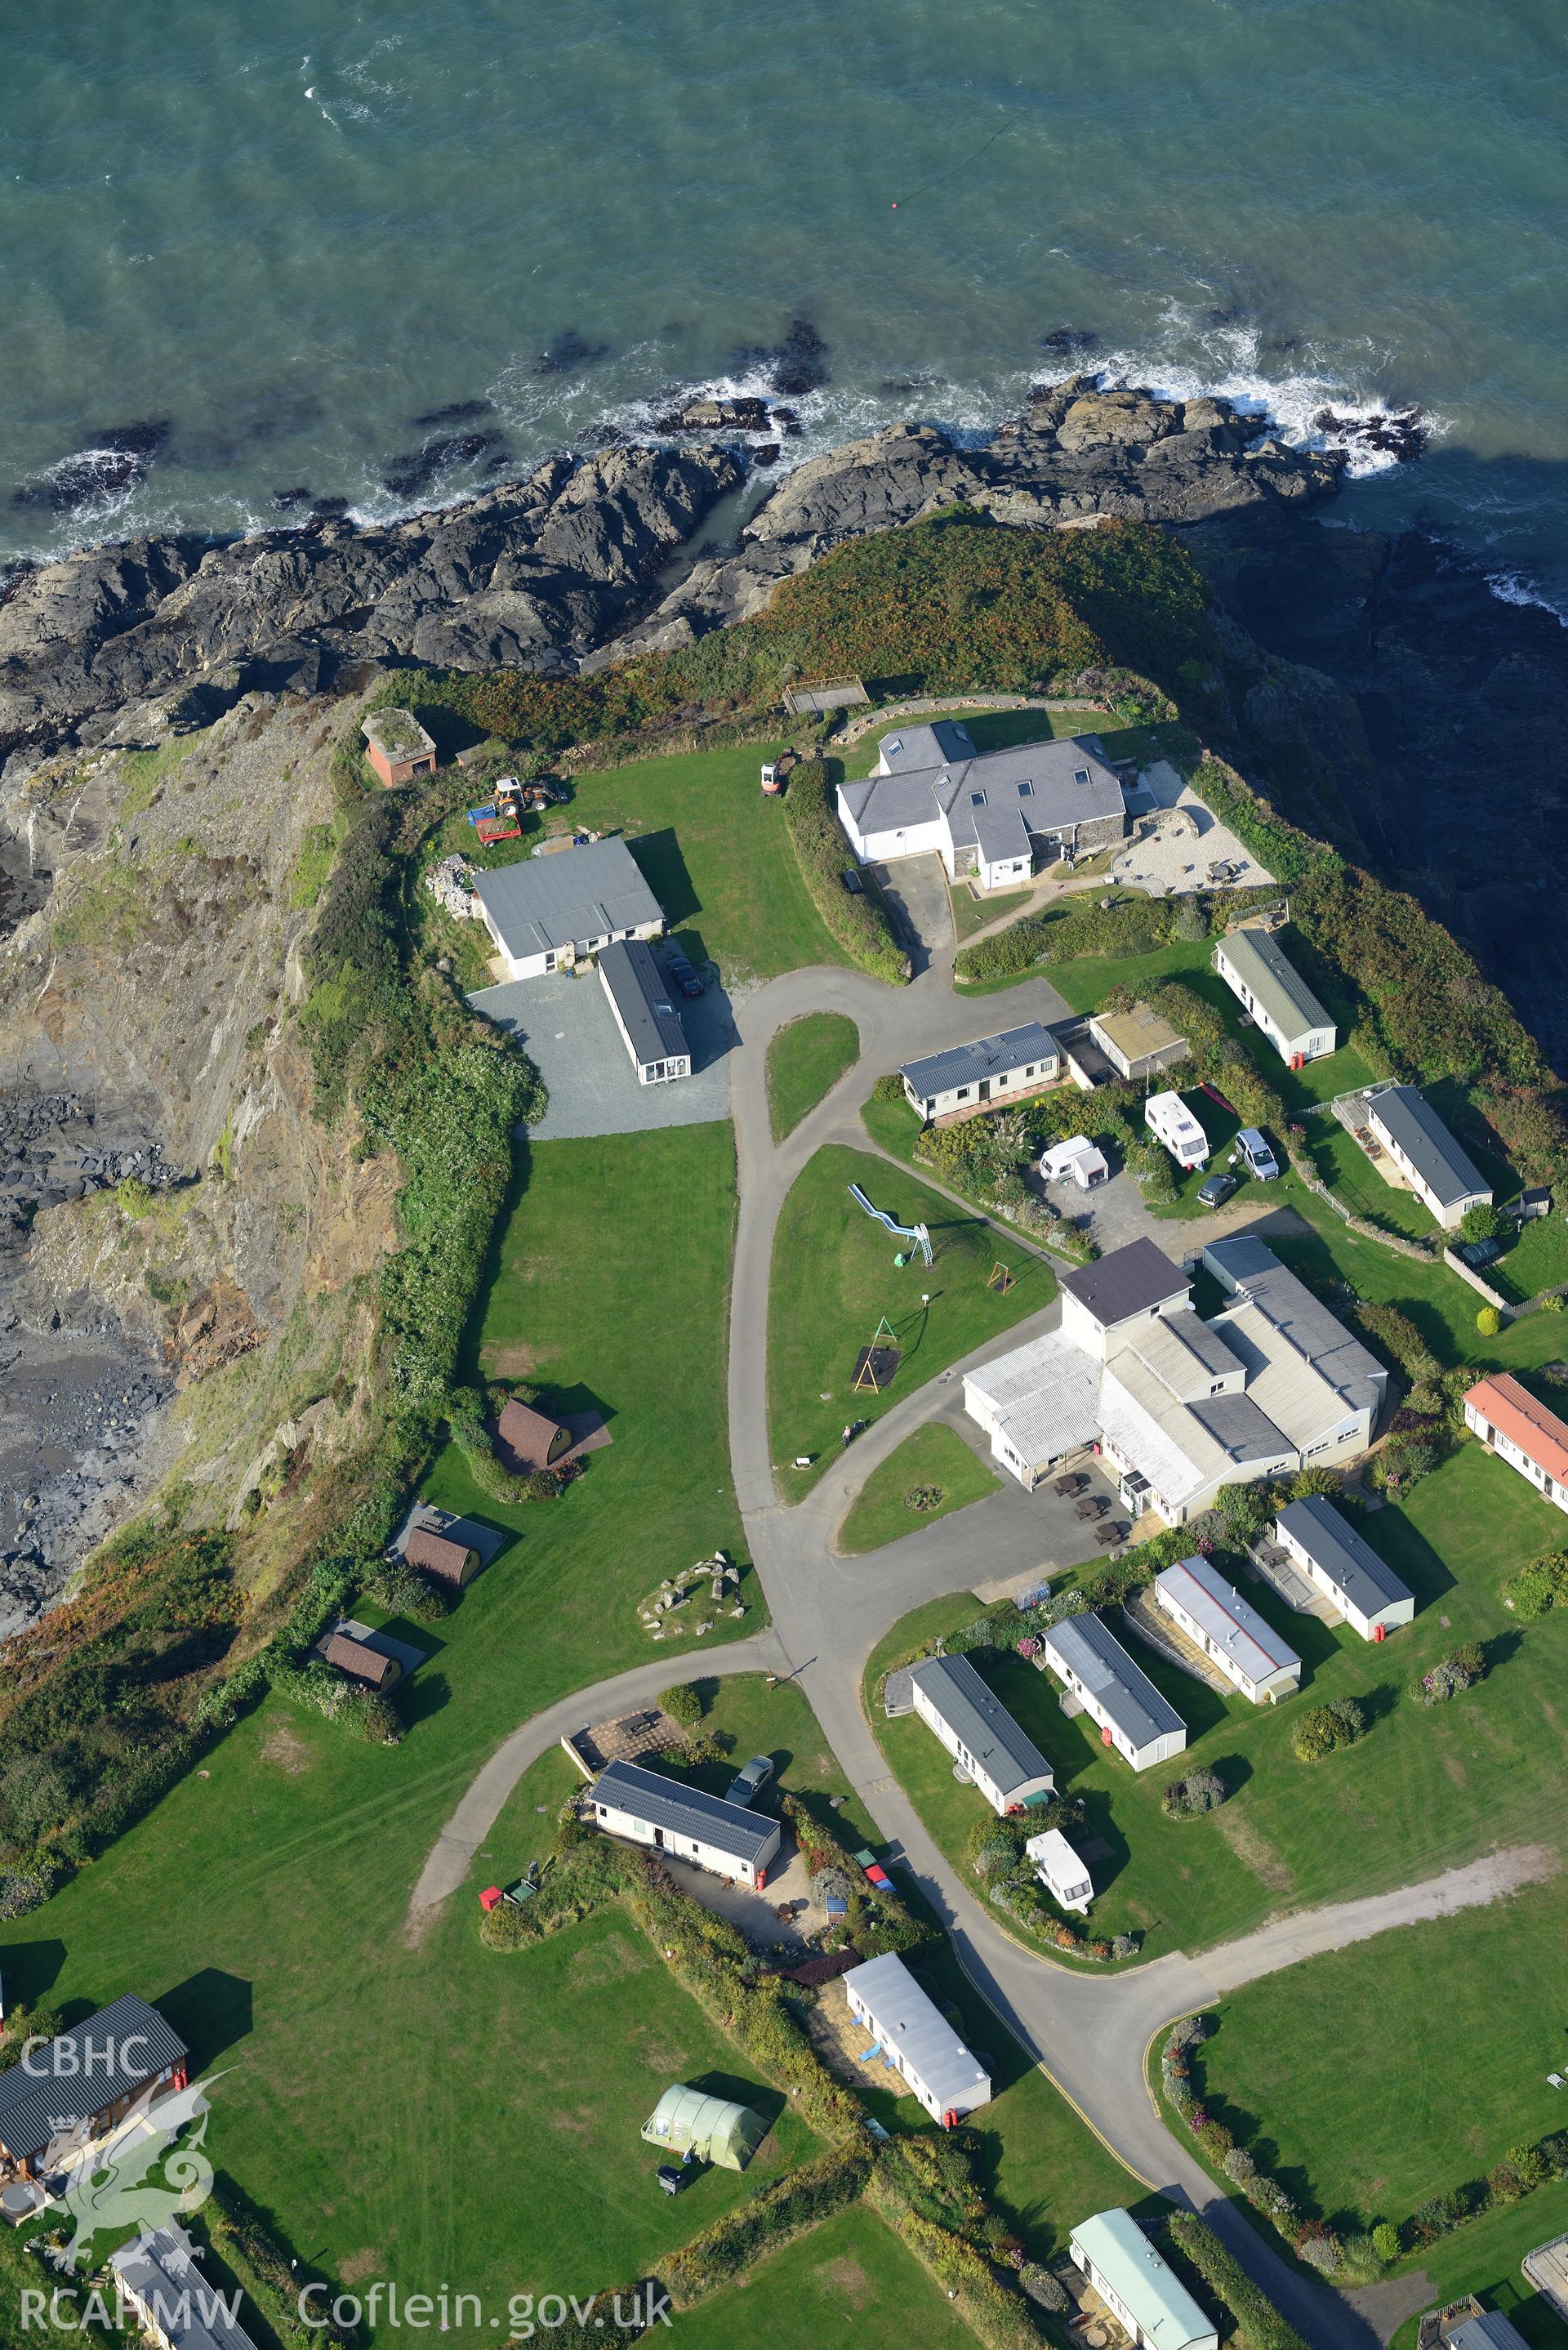 Fishguard battery, Penrhyn, on the shores of Fishguard Bay. Oblique aerial photograph taken during the Royal Commission's programme of archaeological aerial reconnaissance by Toby Driver on 30th September 2015.